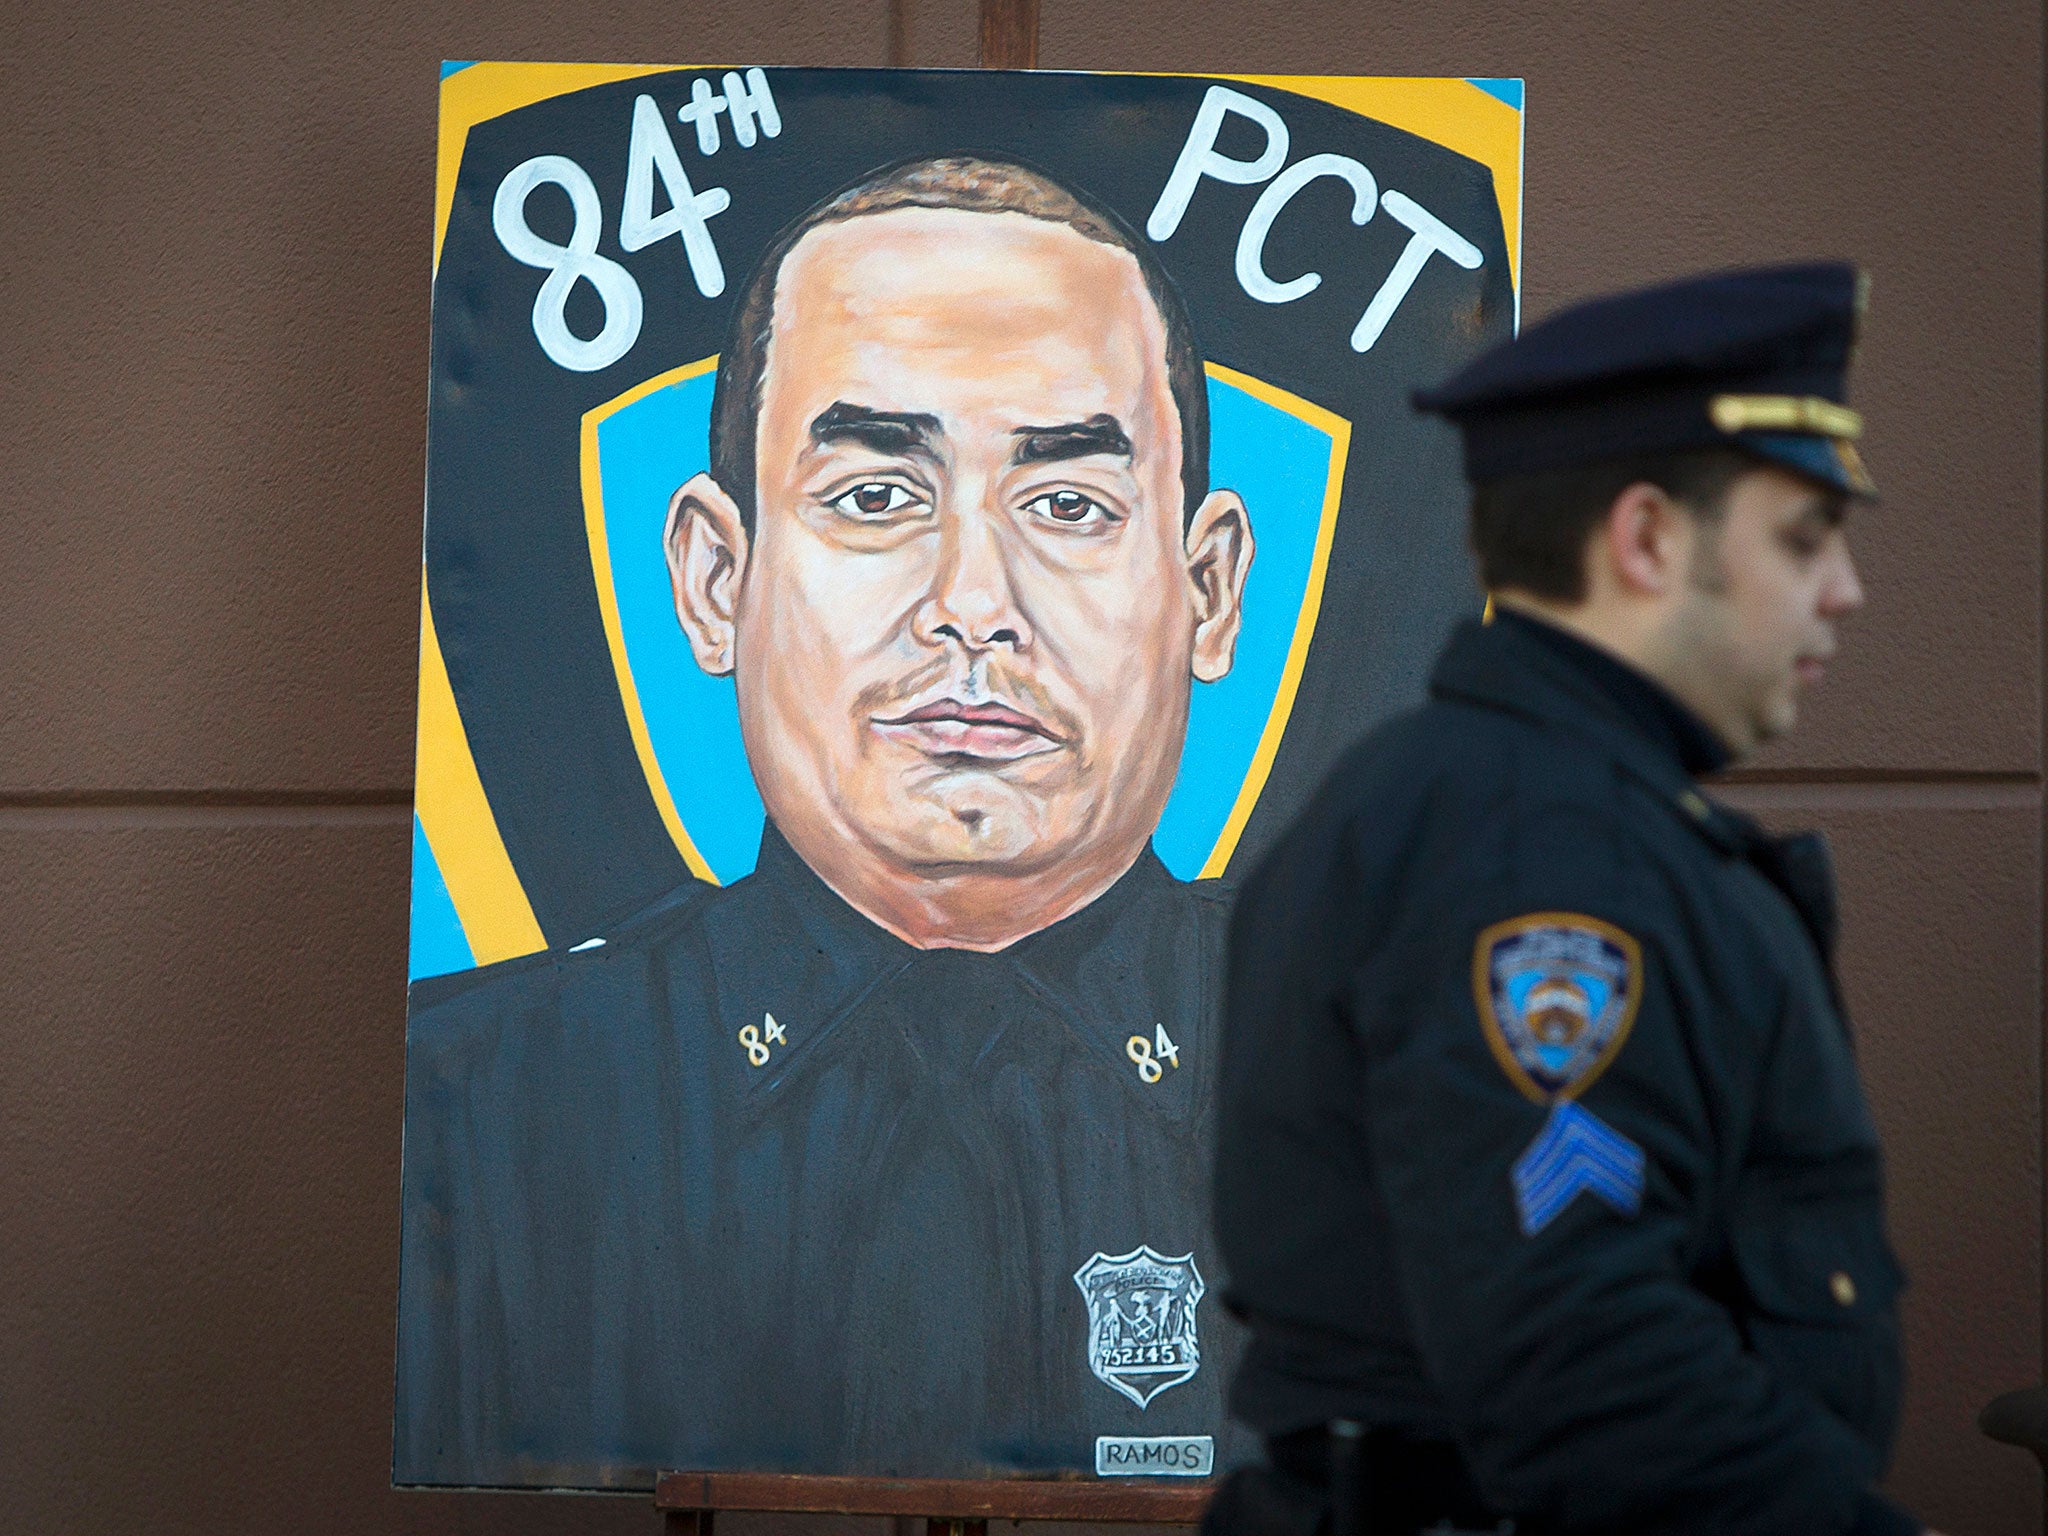 A painting of Rafael Ramos, one of the New York police officers killed by a gunman